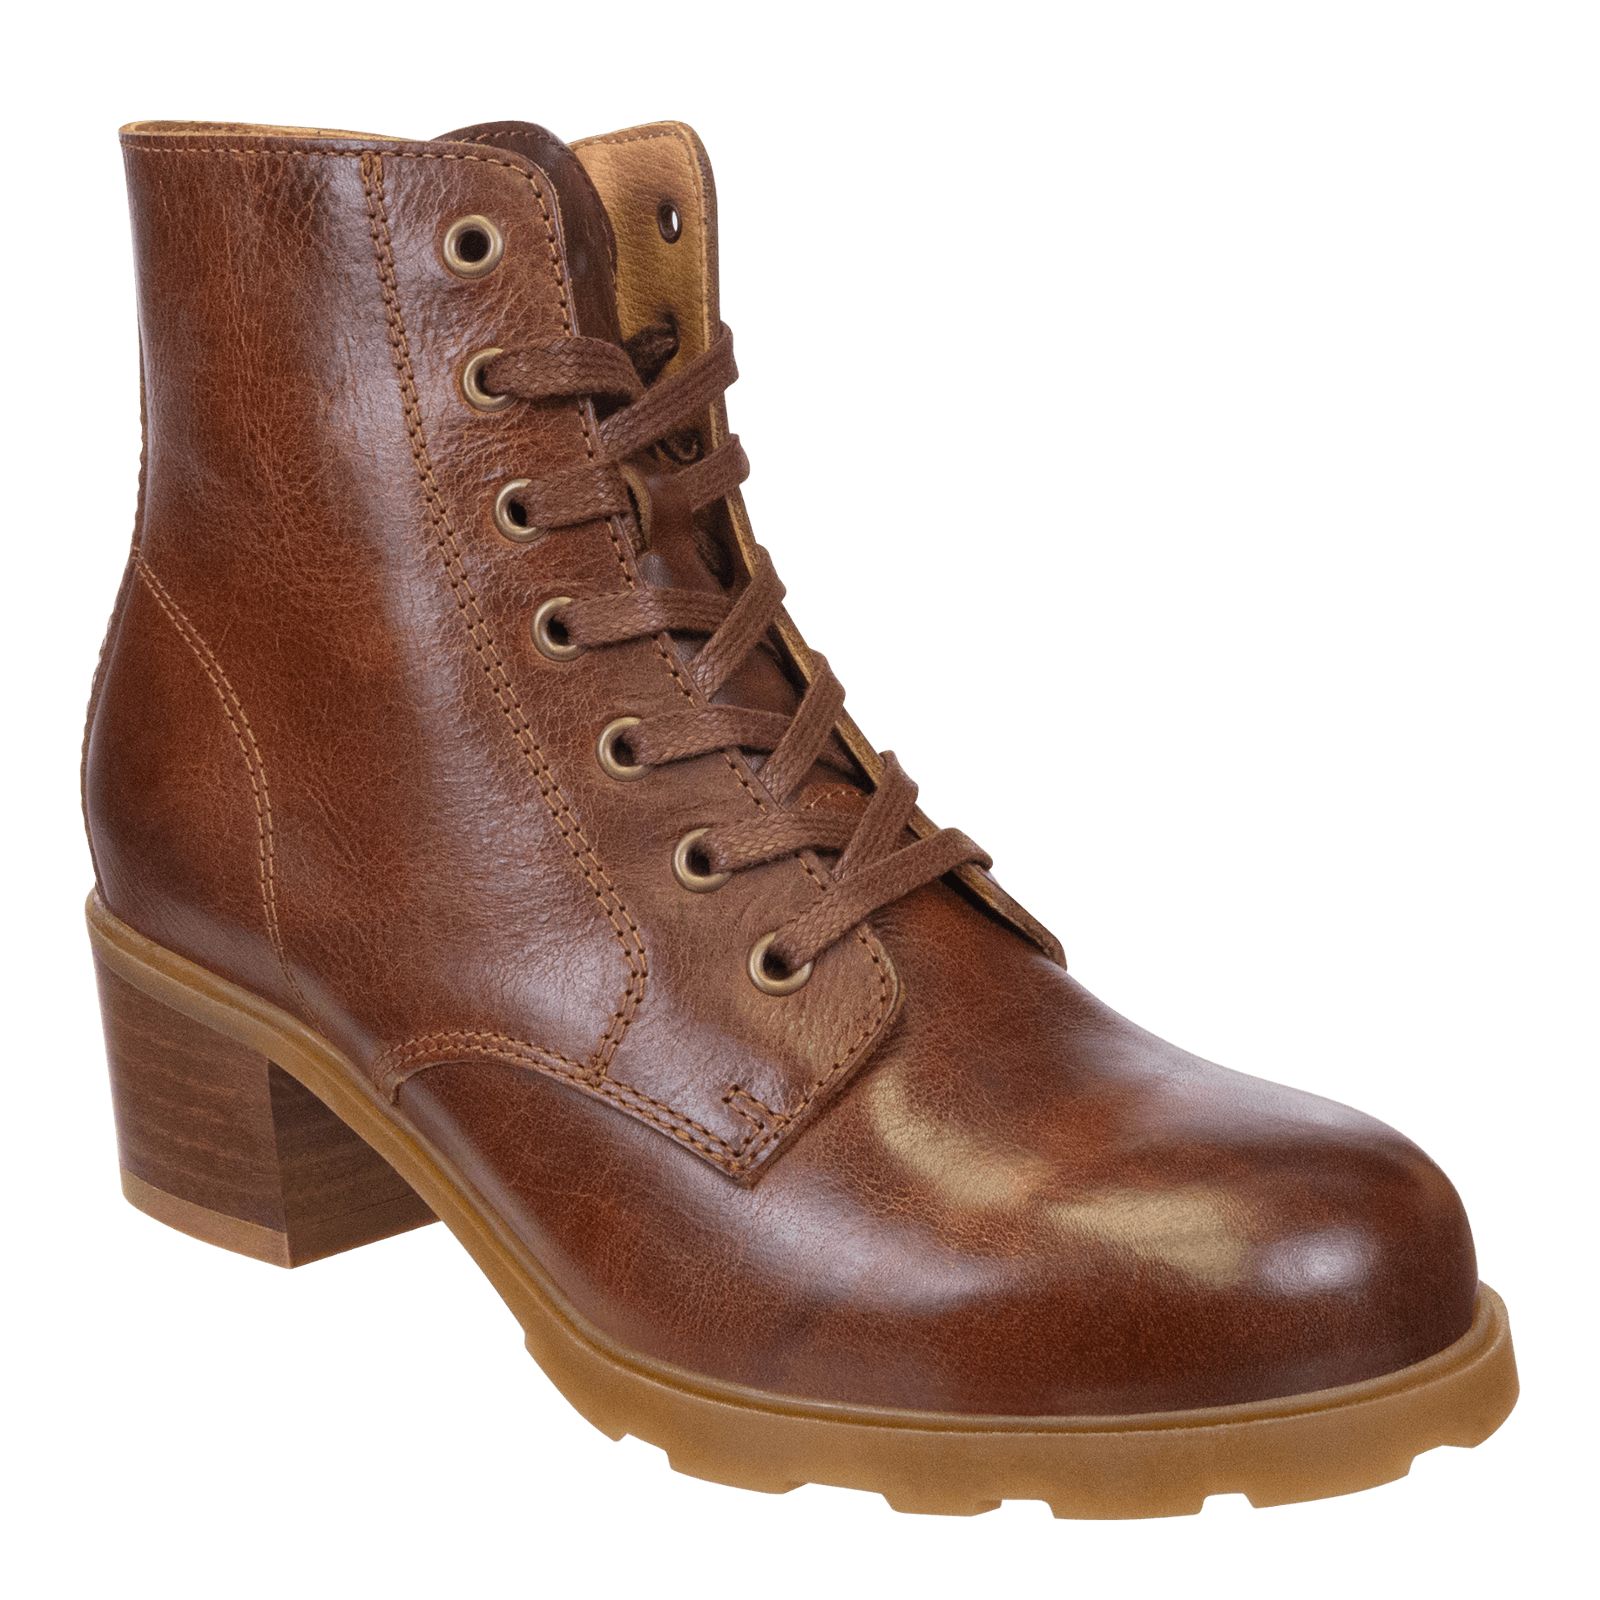 ARC in BROWN LEATHER Heeled Ankle Boots